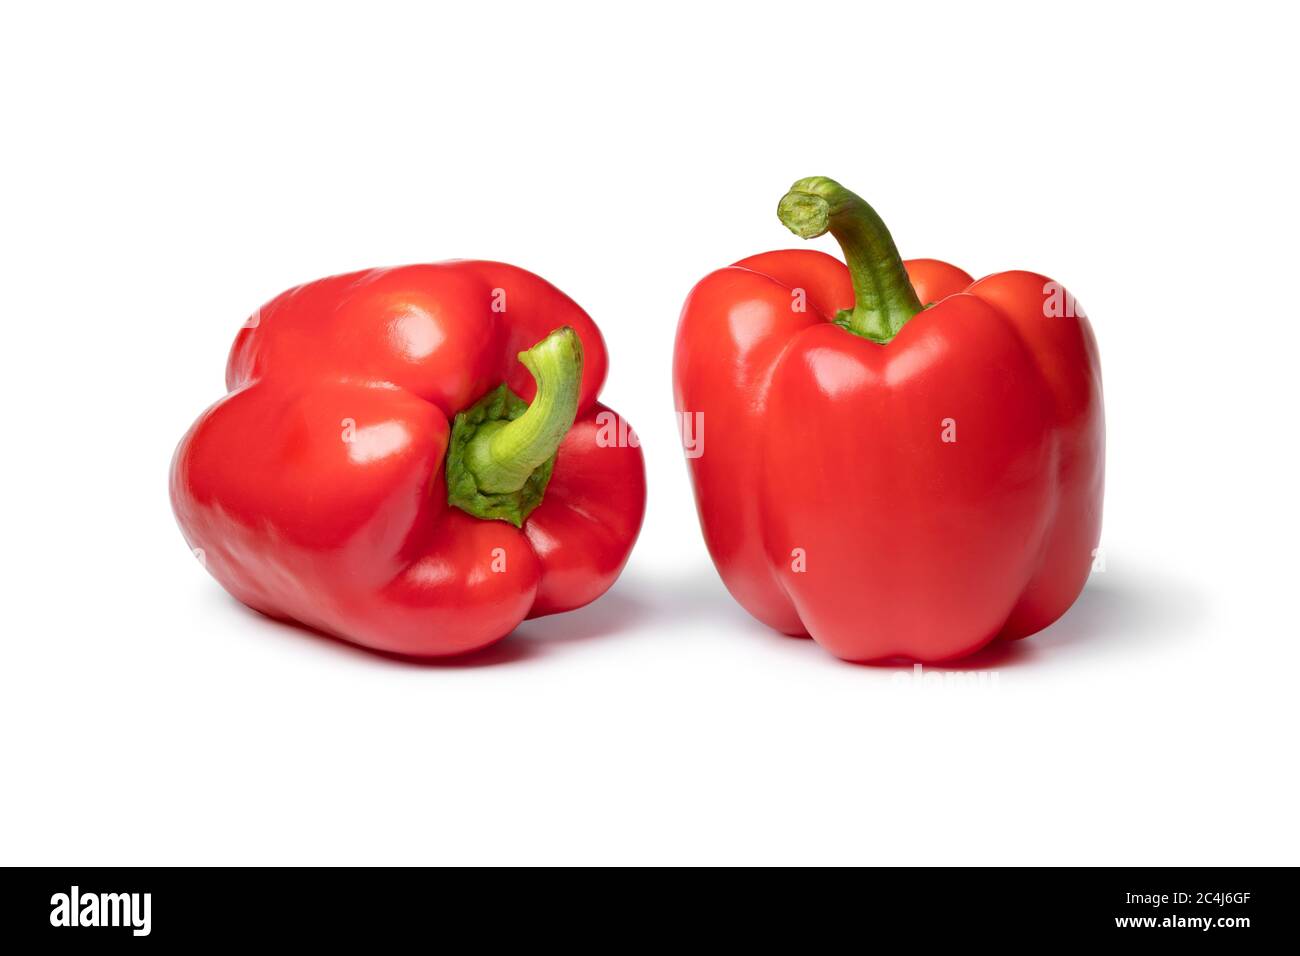 Pair of fresh red bell peppers close up isolated on white background Stock Photo